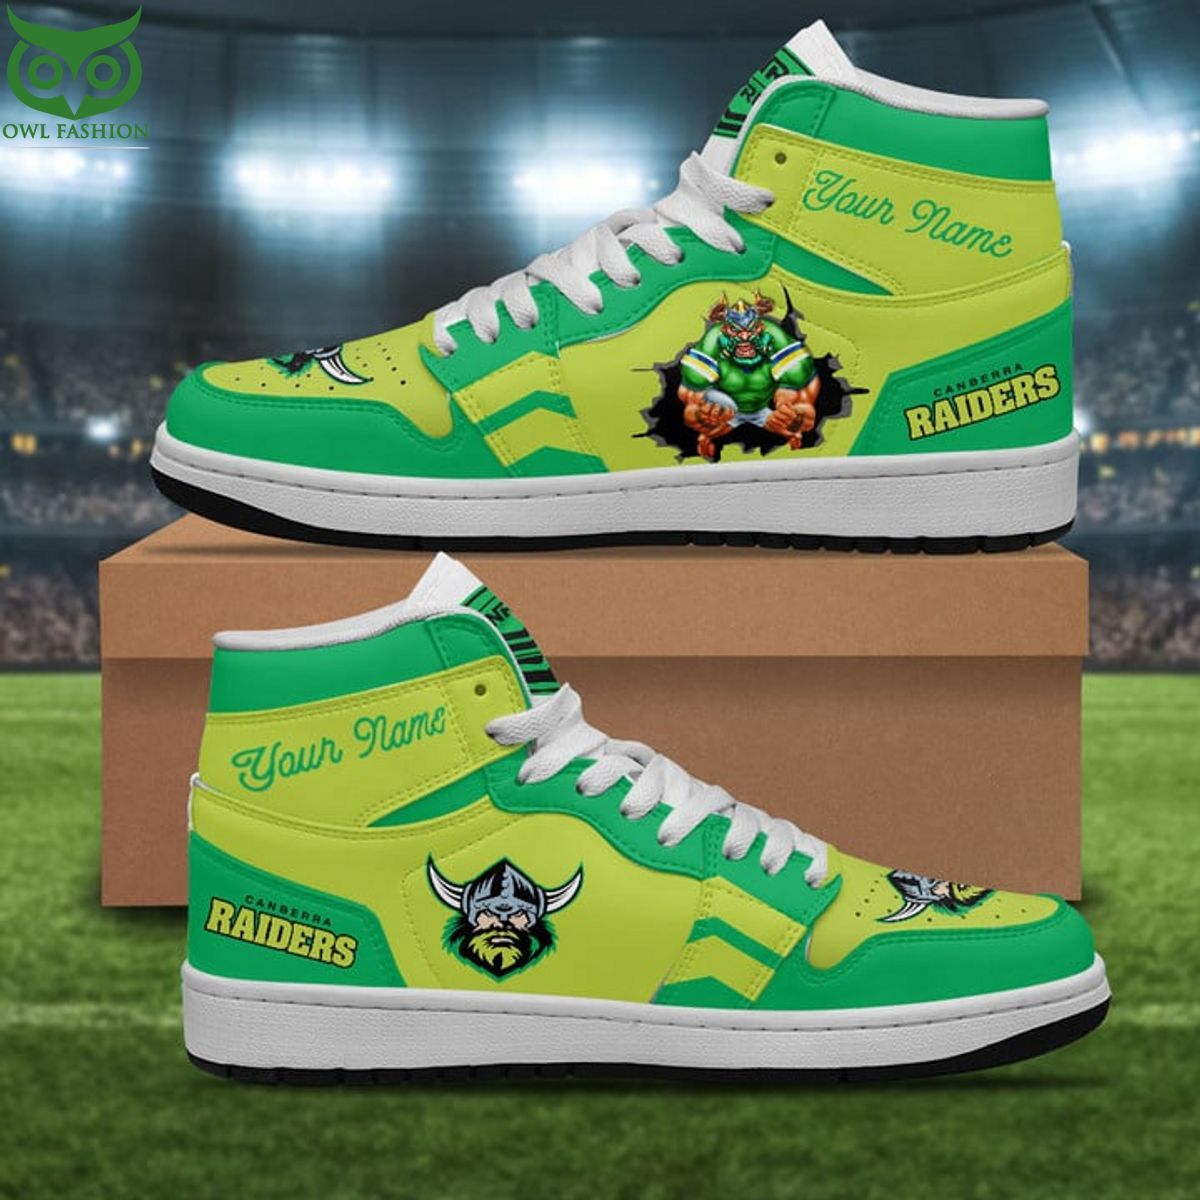 Personalized NRL Canberra Raiders Air Jordan 1 Sneakers Limited